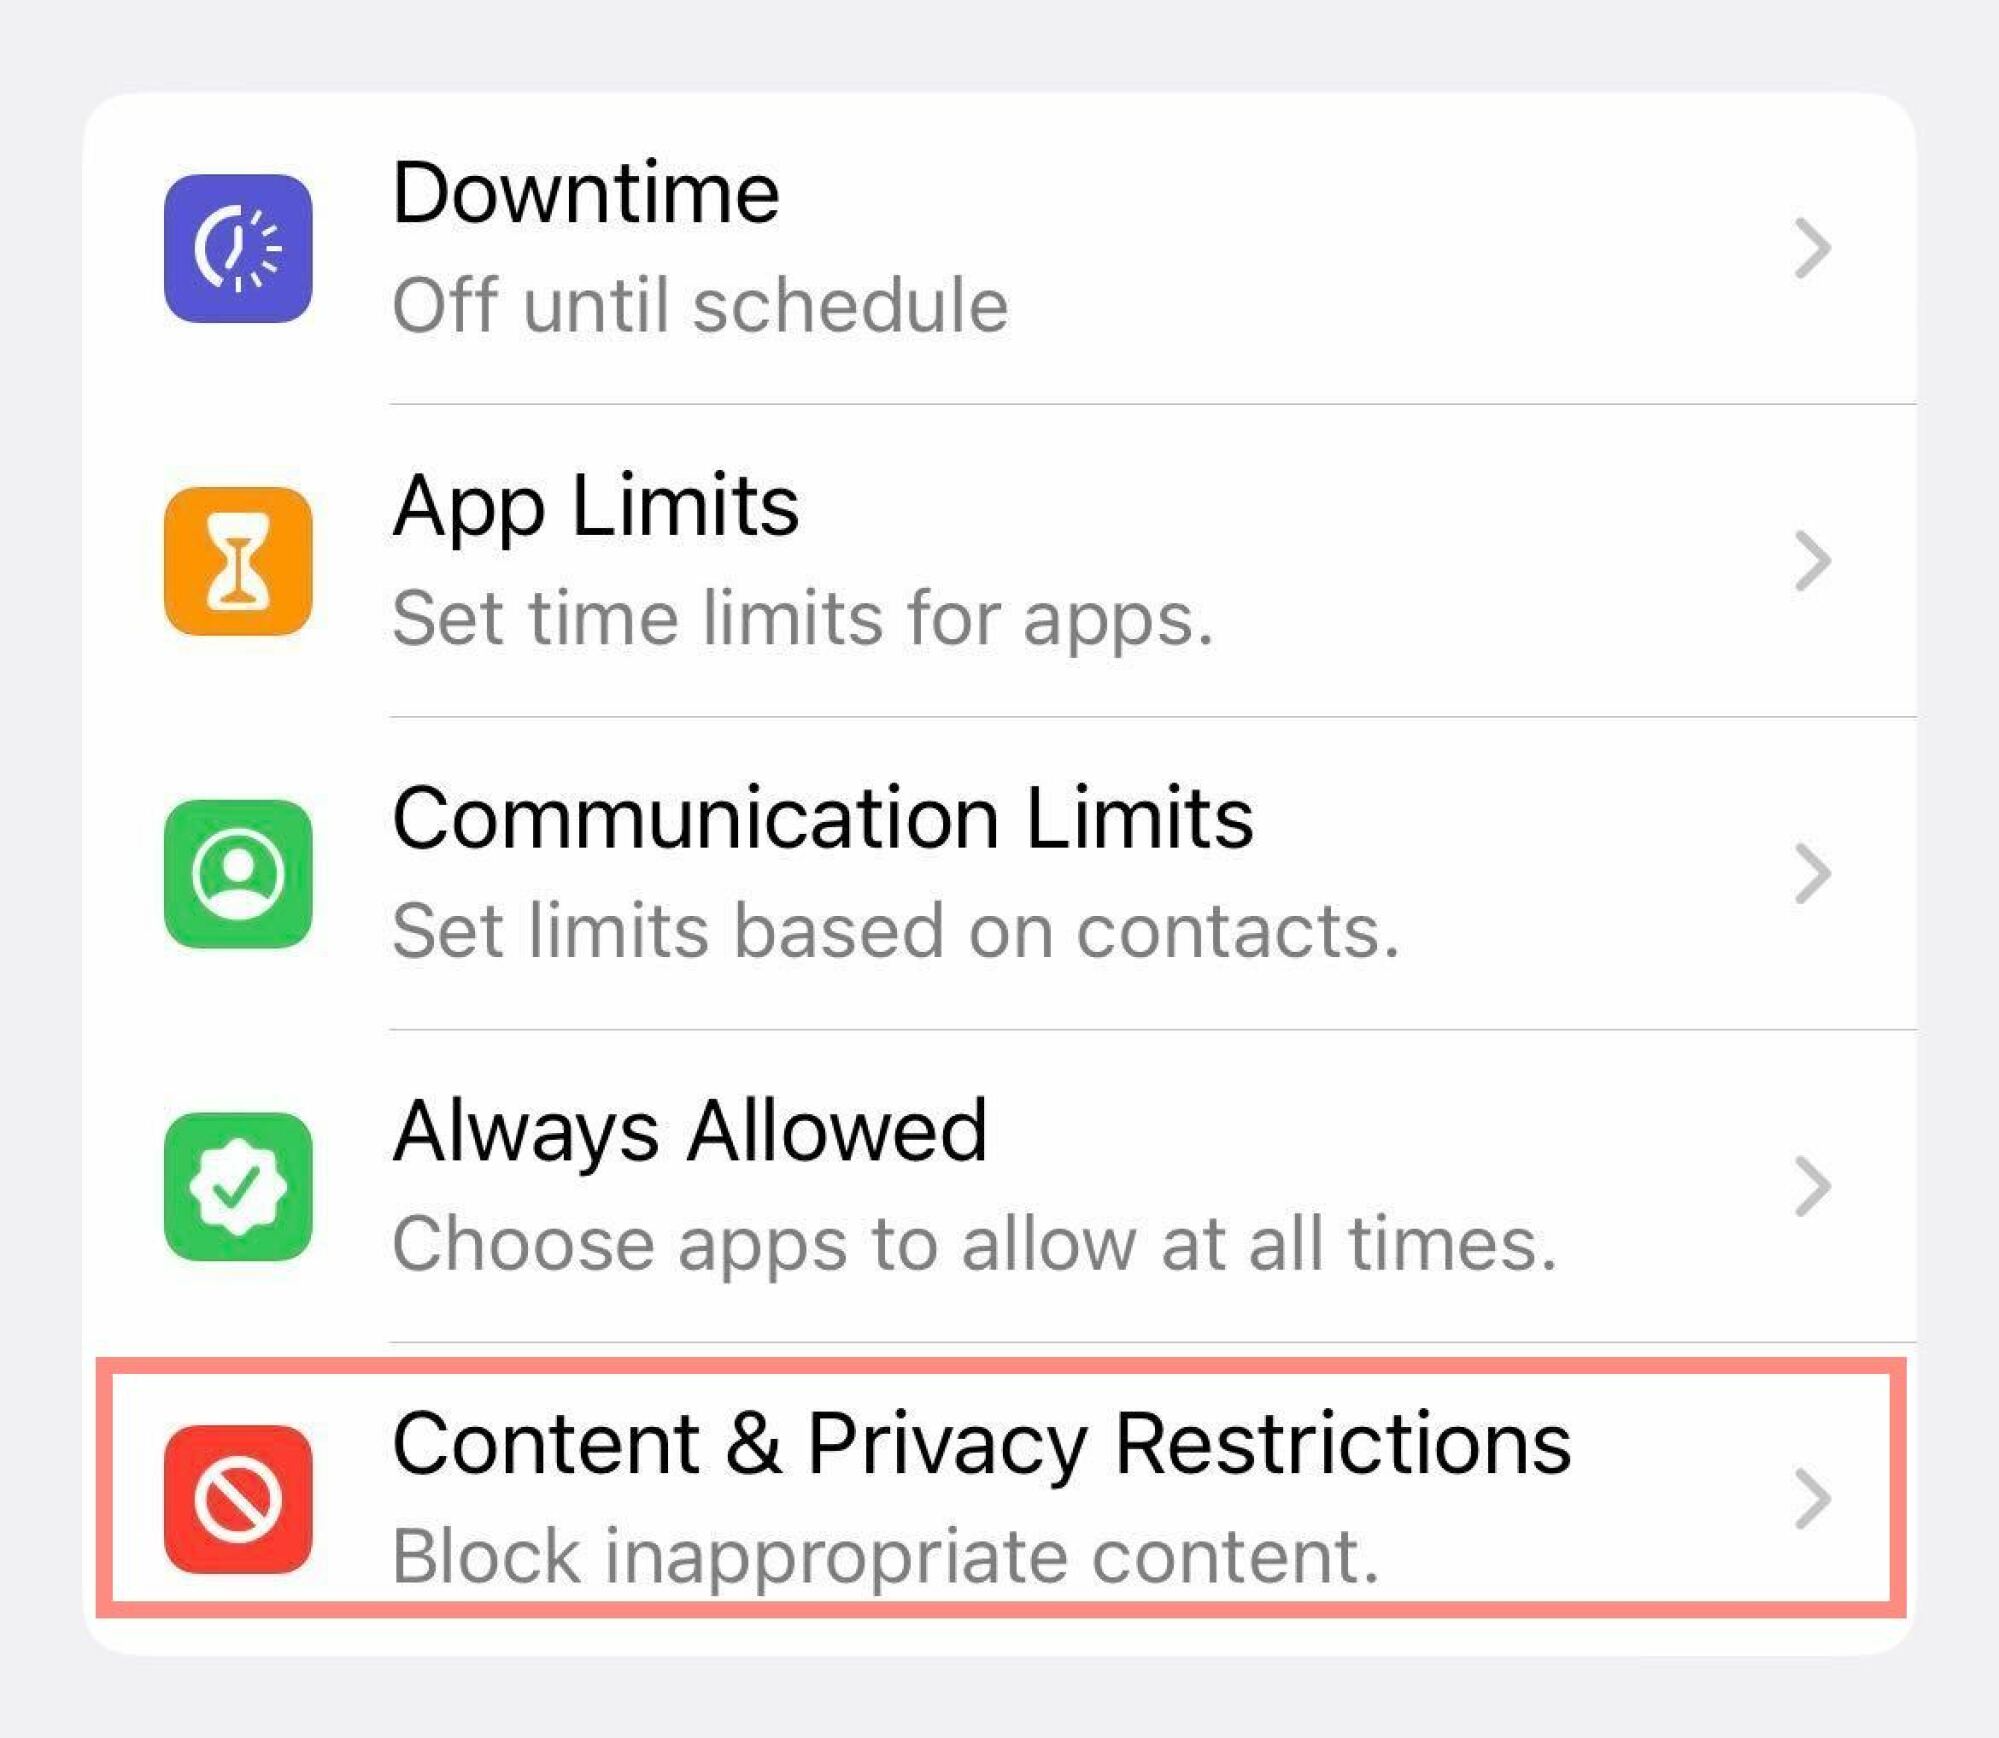 A screenshot showing "Content & Privacy Restrictions".